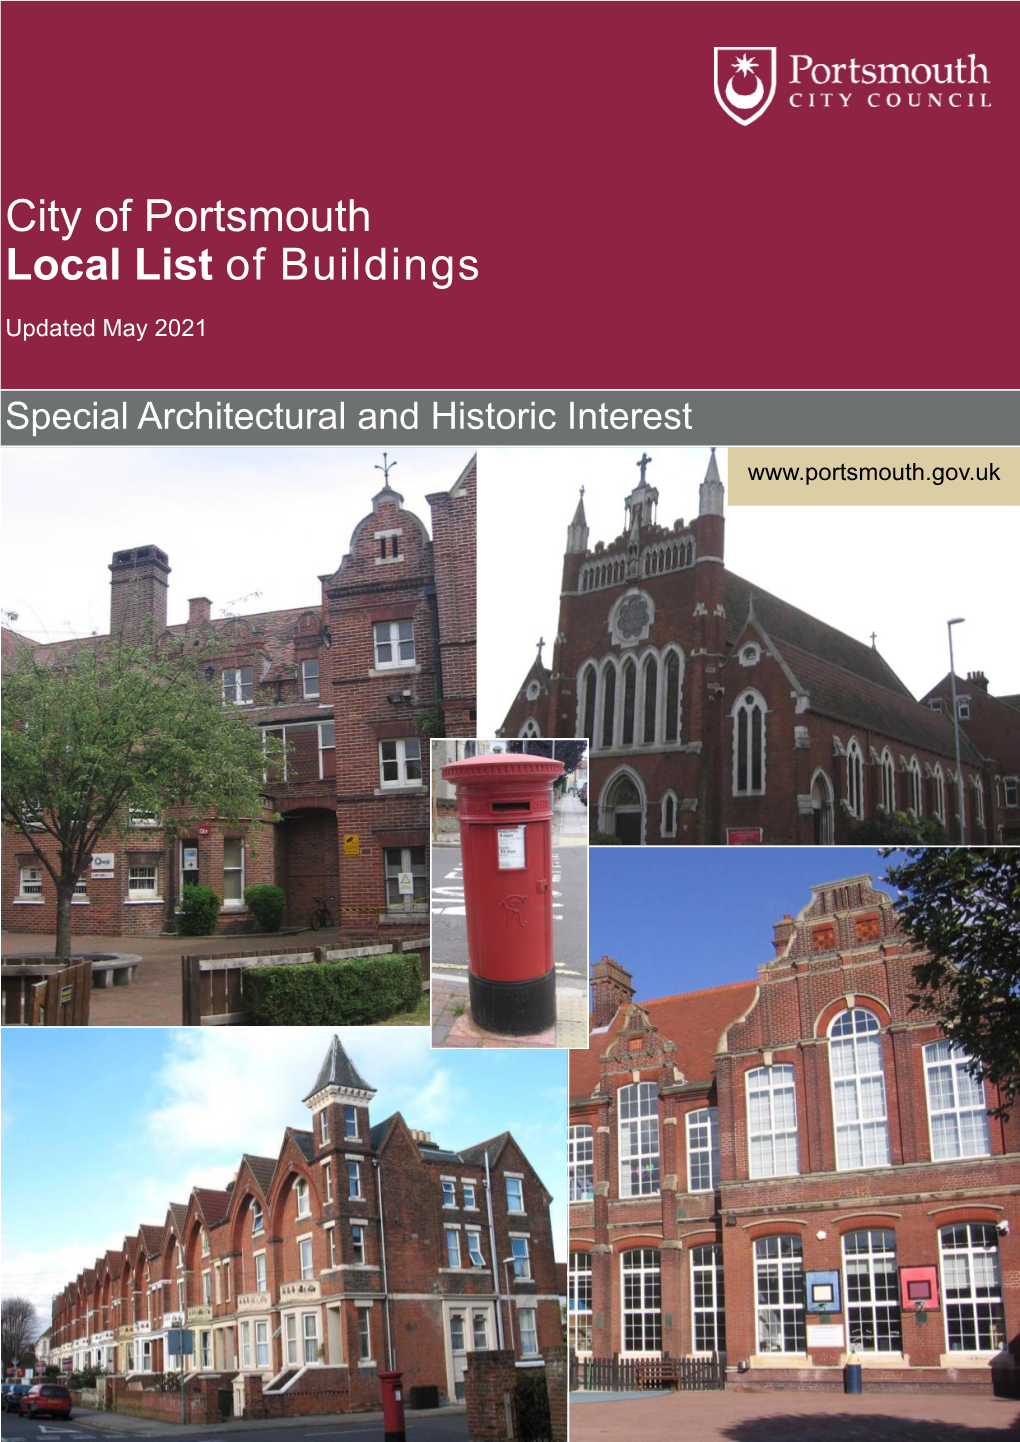 Local List of Building: Special Architectural and Historic Interest